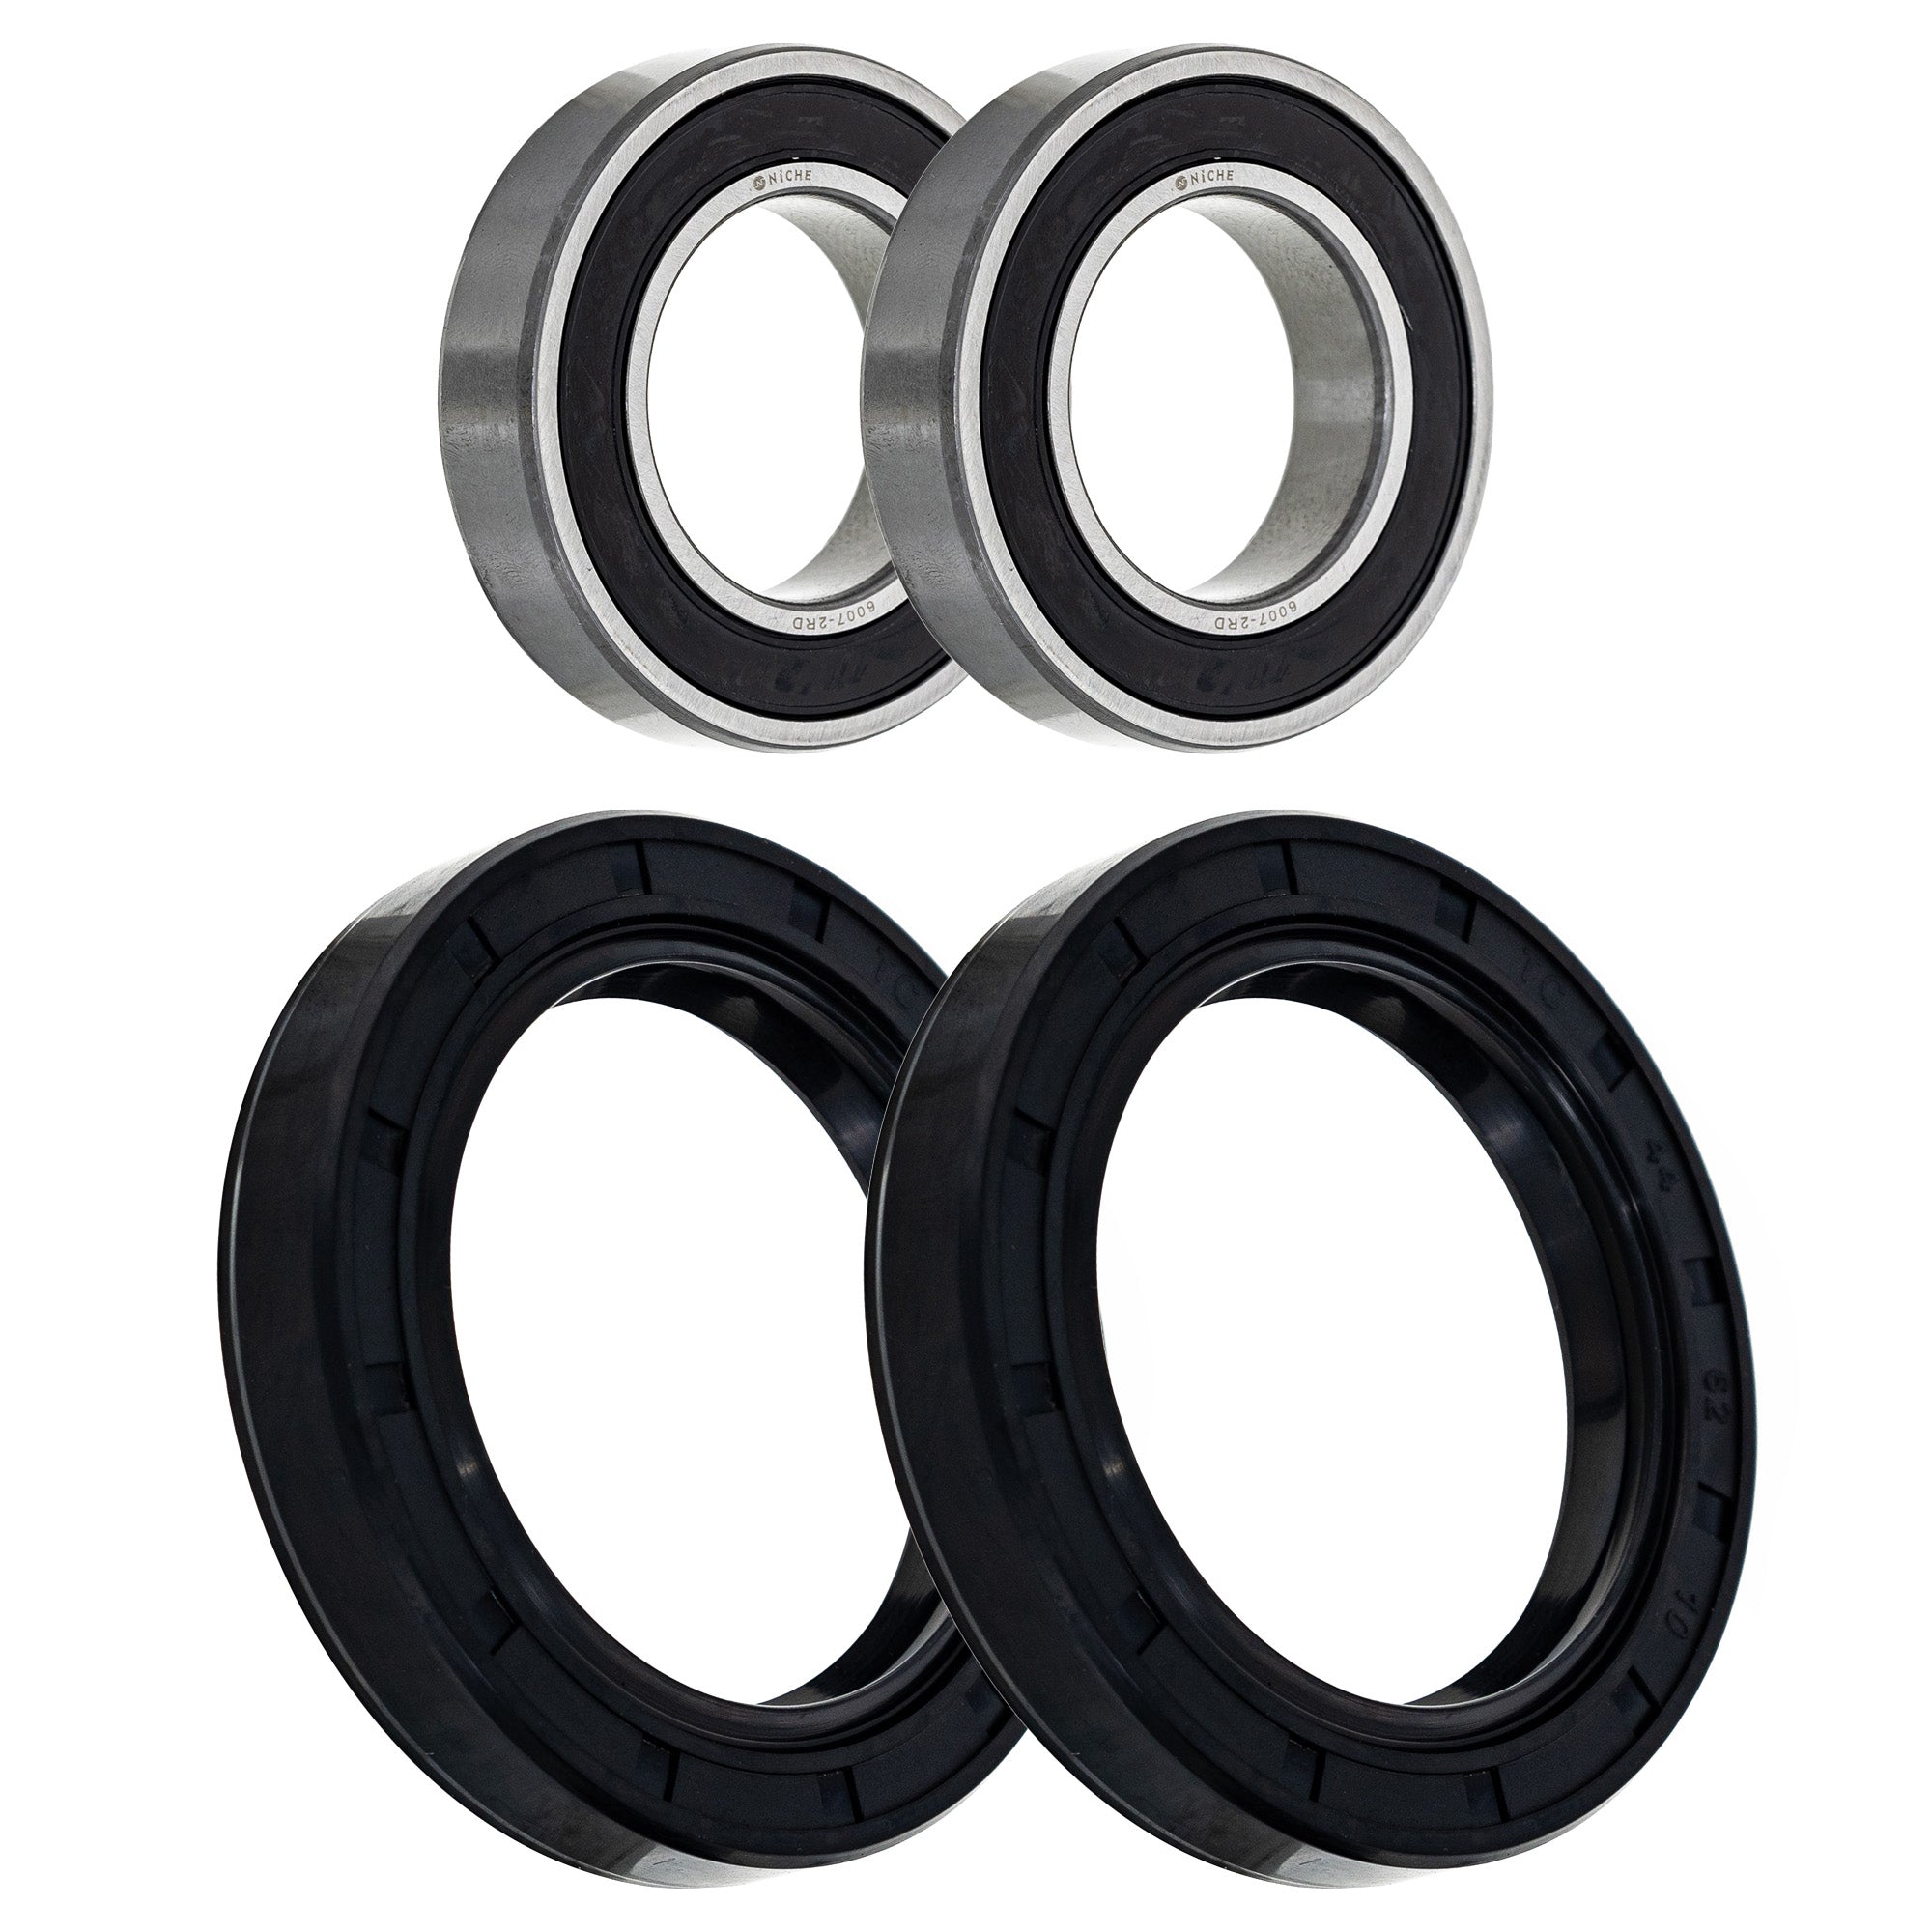 Wheel Bearing Seal Kit for zOTHER Grizzly FourTrax NICHE MK1009111